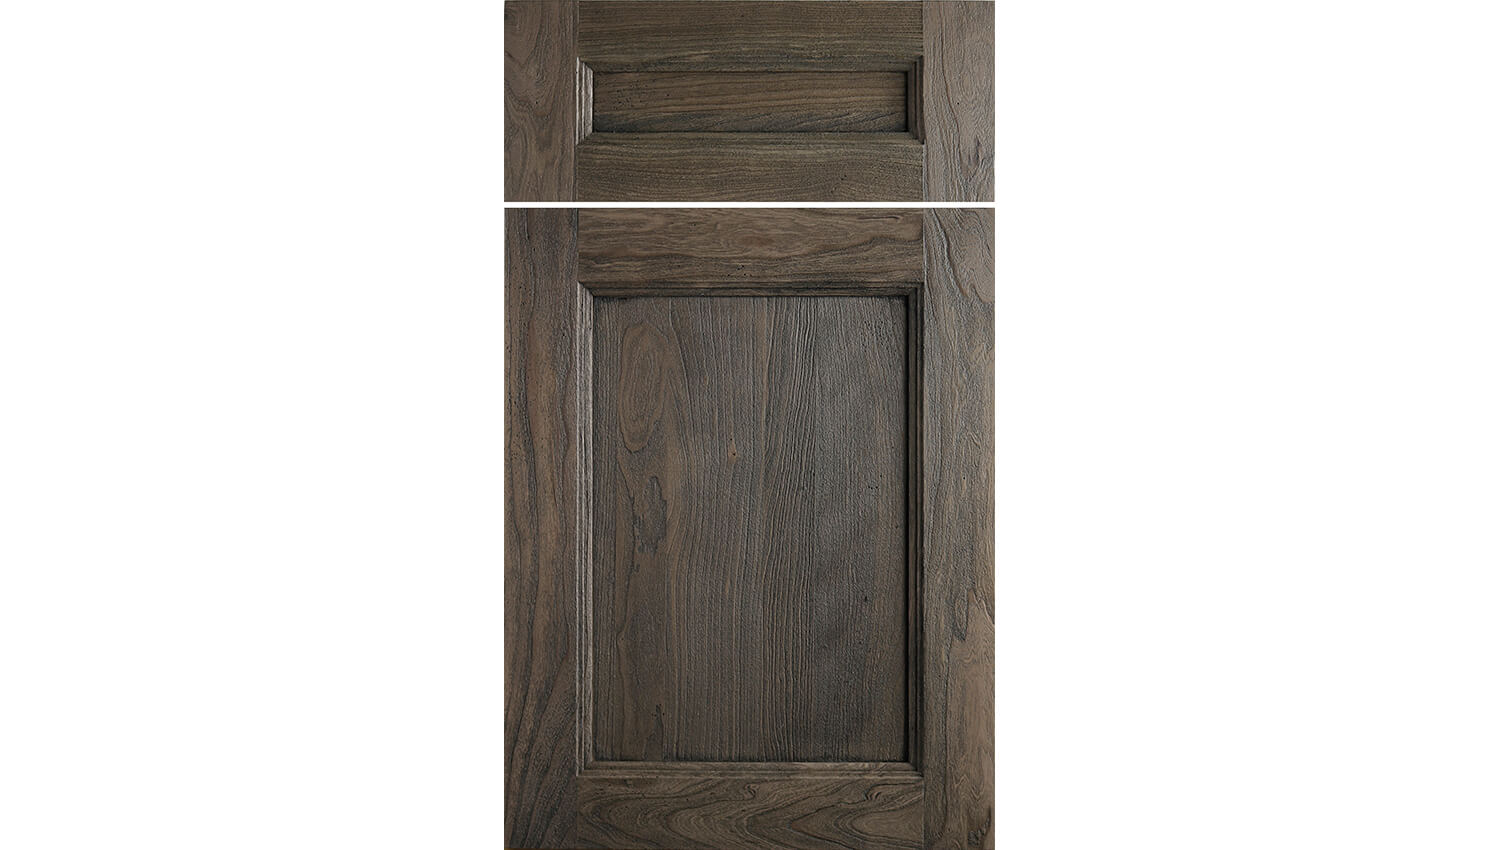 Meridian is a beautiful door style with a detailed shaker flat panel from Dura Supreme Cabinetry, The door is shown here in a dark weathered wood finish.